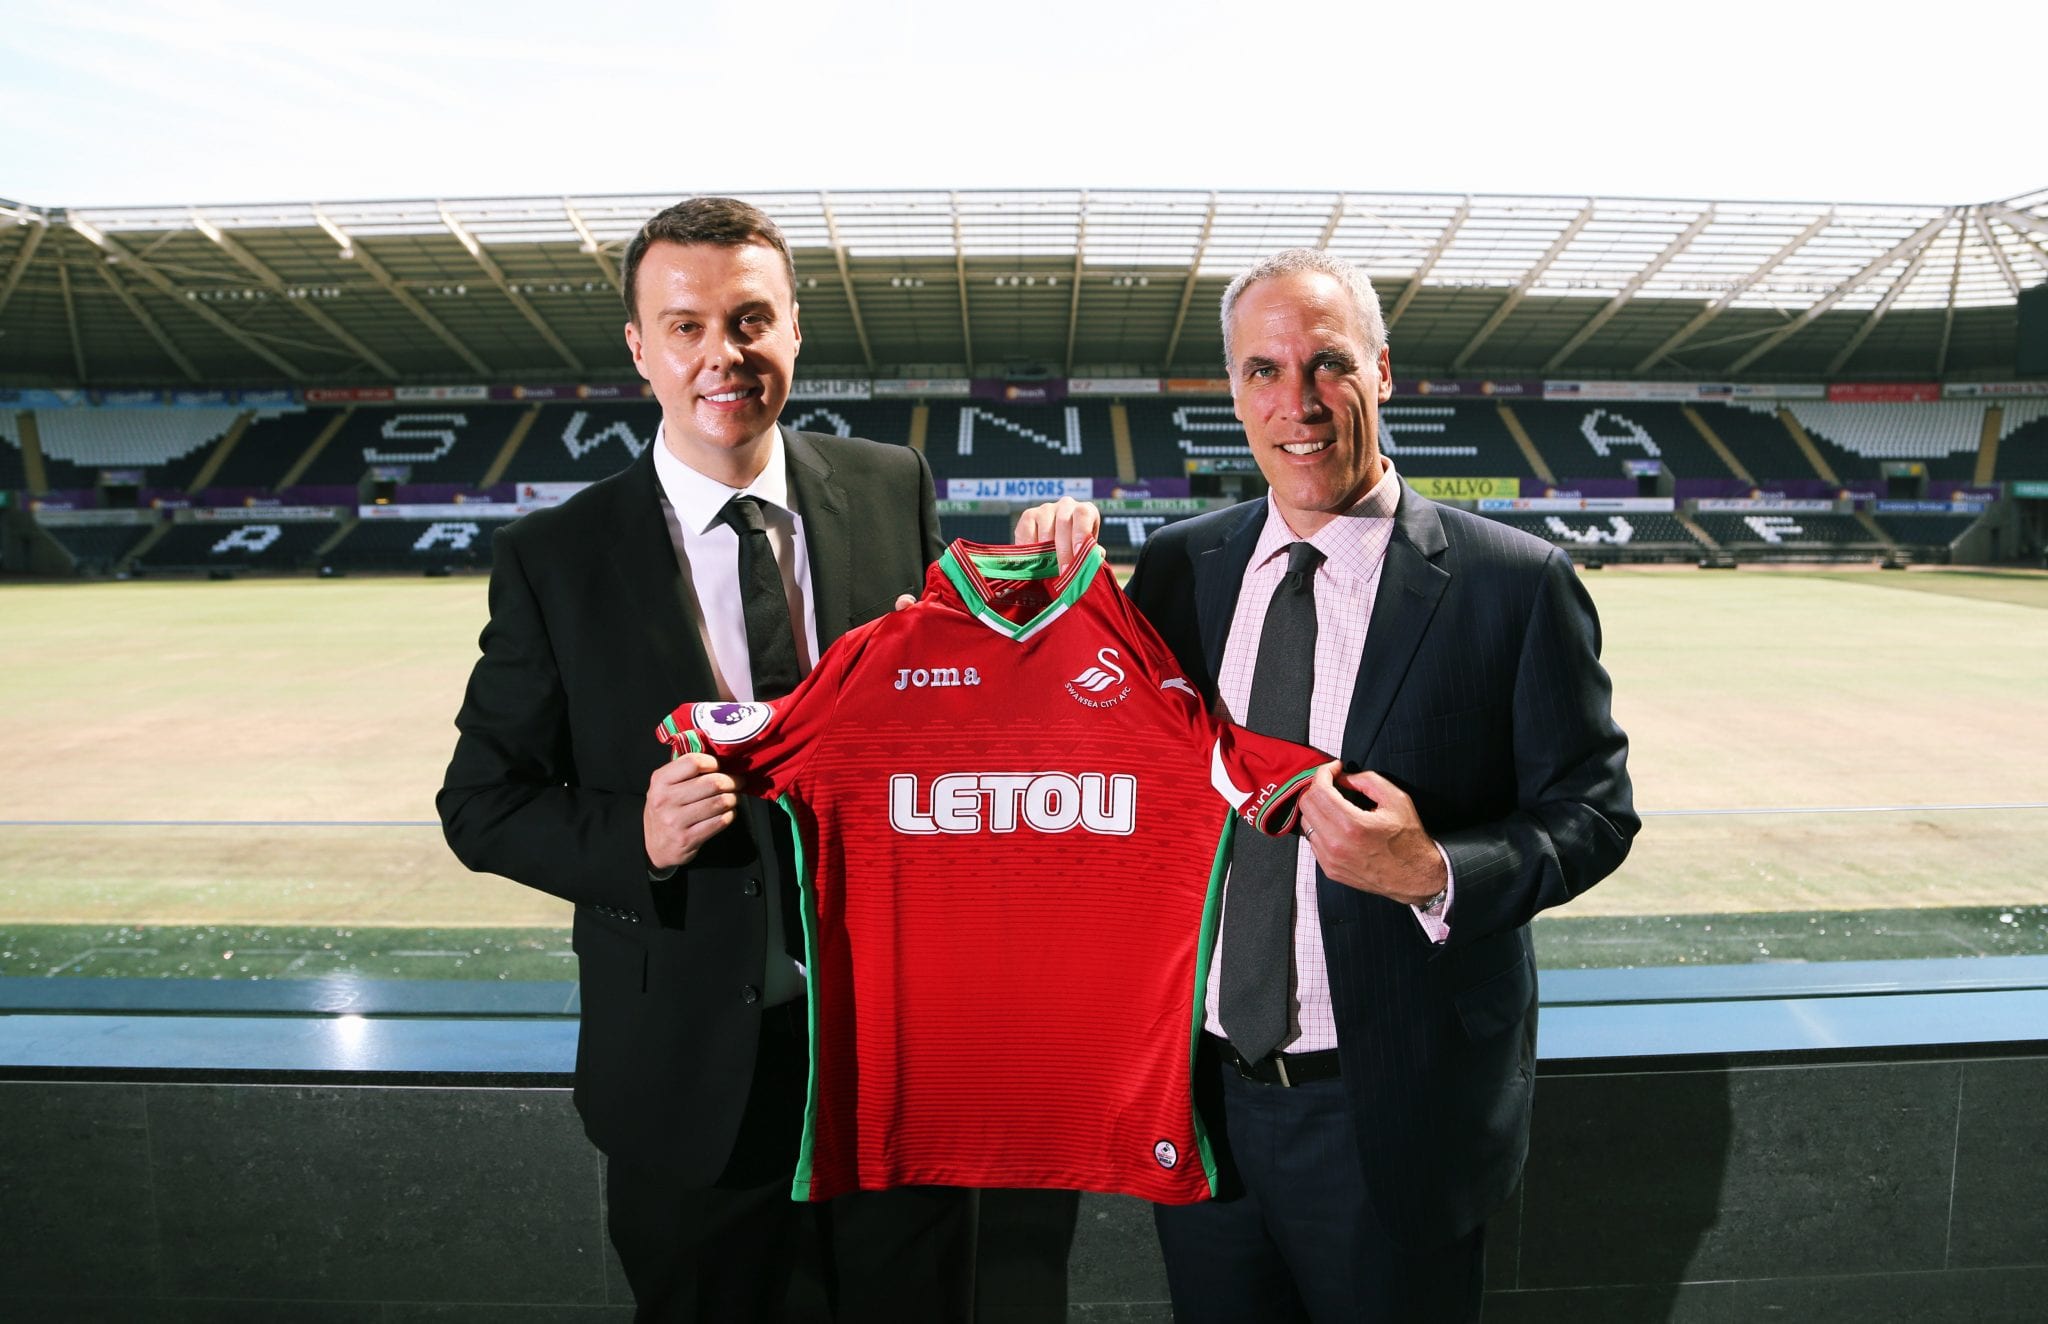 Pictured L-R: Paul Fox, CEO of Letou with Chris Pearlman, COO of Swansea City FC. Monday 19 June 2017 Re: Swansea City FC launch their new home and away kits and announce Letou as their new sponsor at the Liberty Stadium, Swansea, Wales, UK.